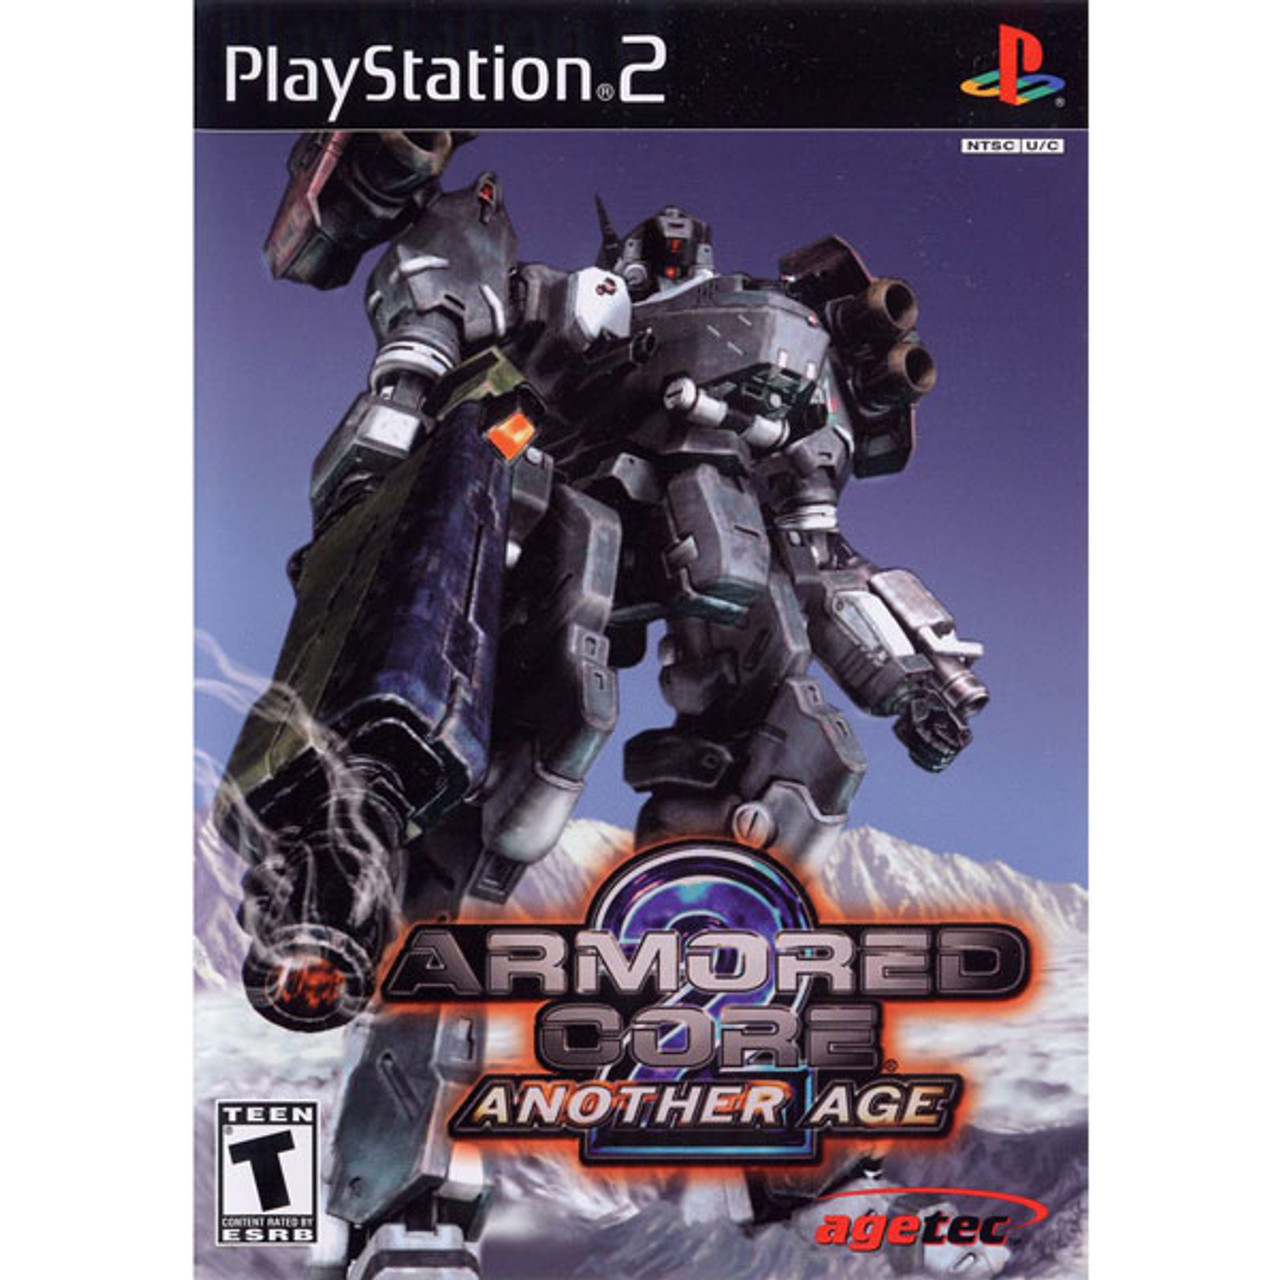 Armored Core 3 (Sony PlayStation 2, 2002) for sale online